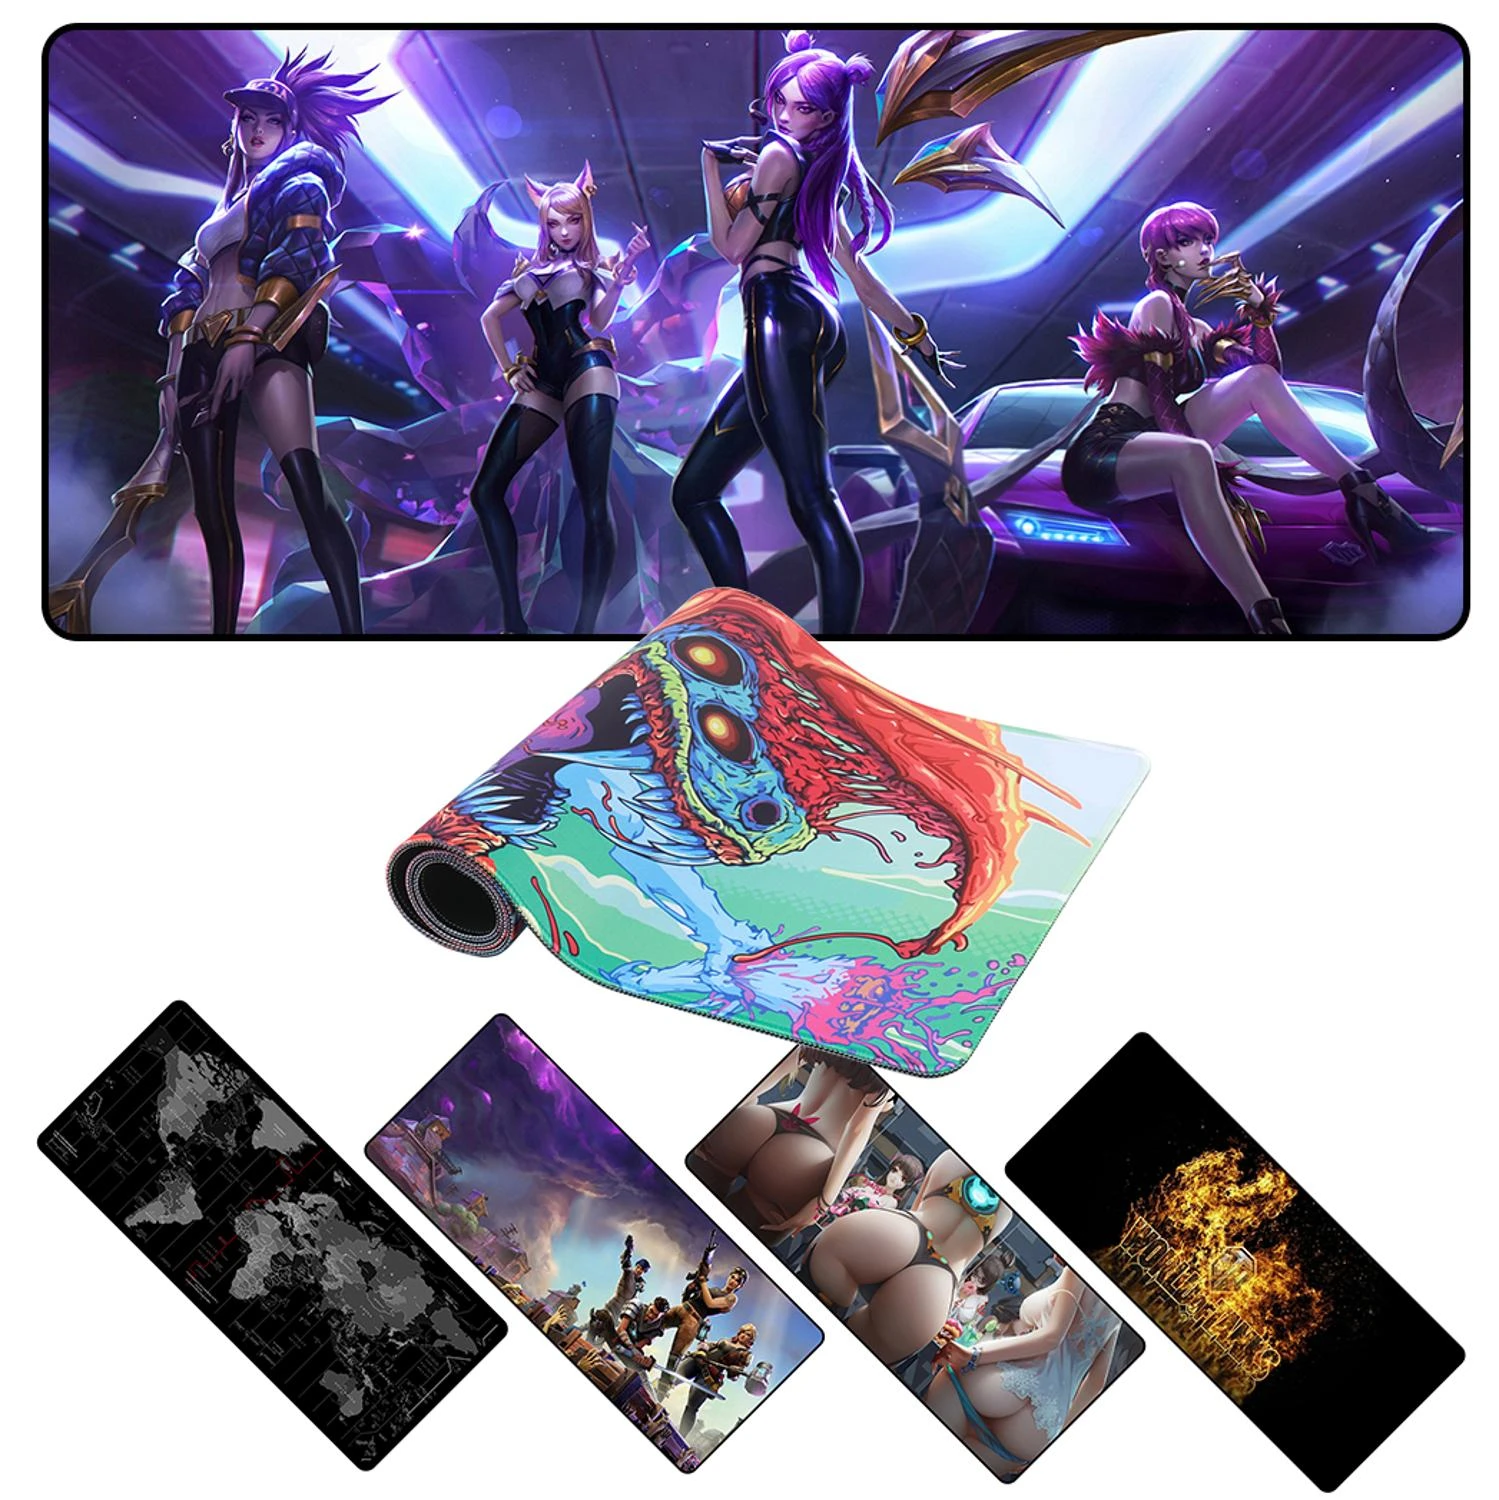 700*300 Personalized Soft Heavy Extended Led Red and Black Girlbhot Gaming Mousepads Printer Mouse Pads Mat